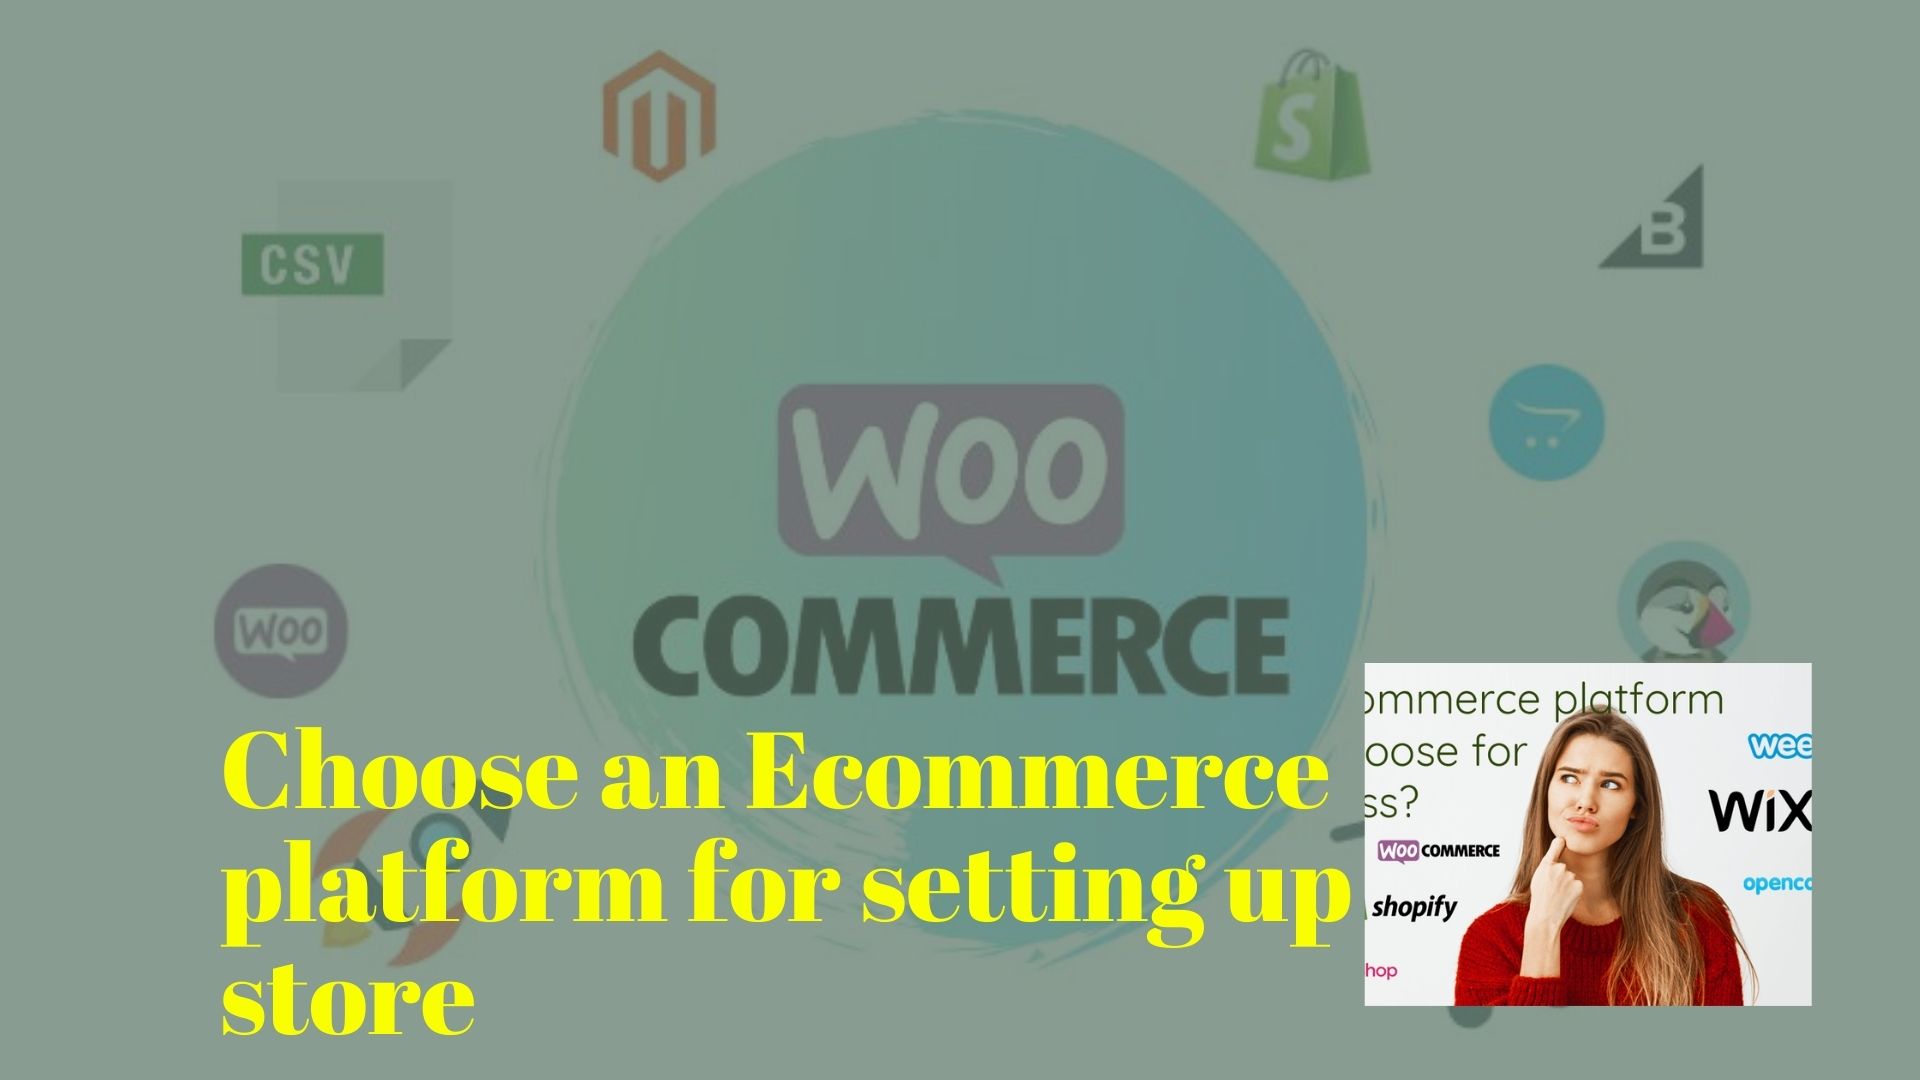 Step 9: Choose an E-Commerce Platform for Setting Up Store